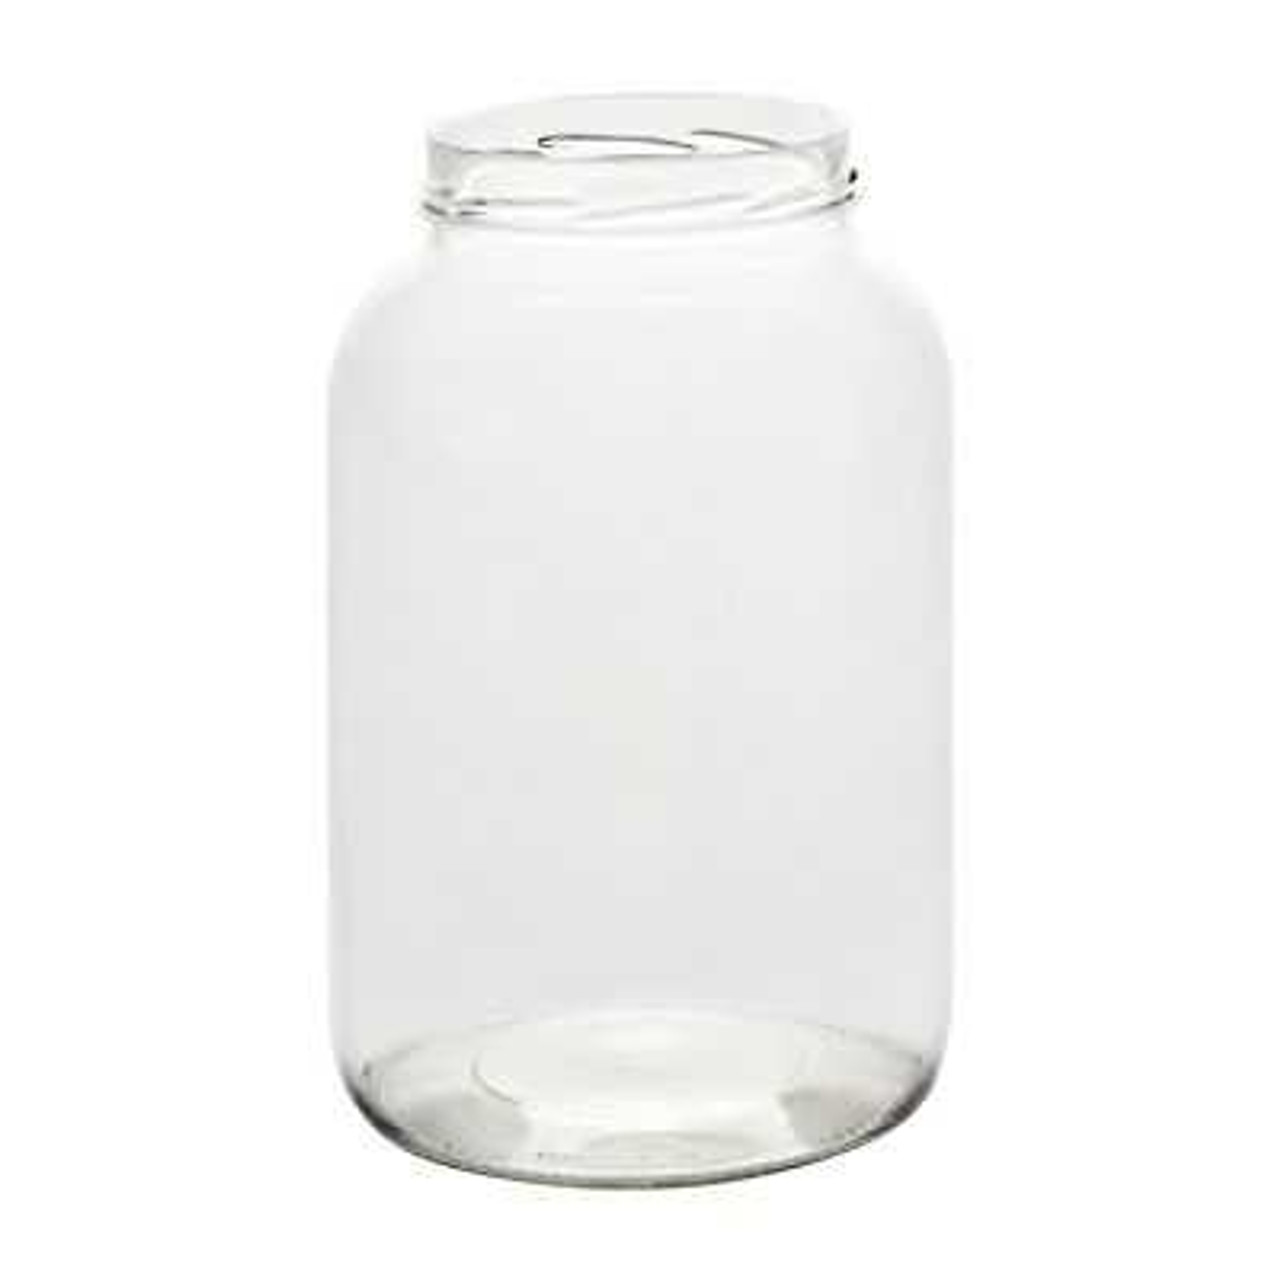 1/2 Gallon (64 oz) Clear Widemouth Glass Jar with White Metal Lid